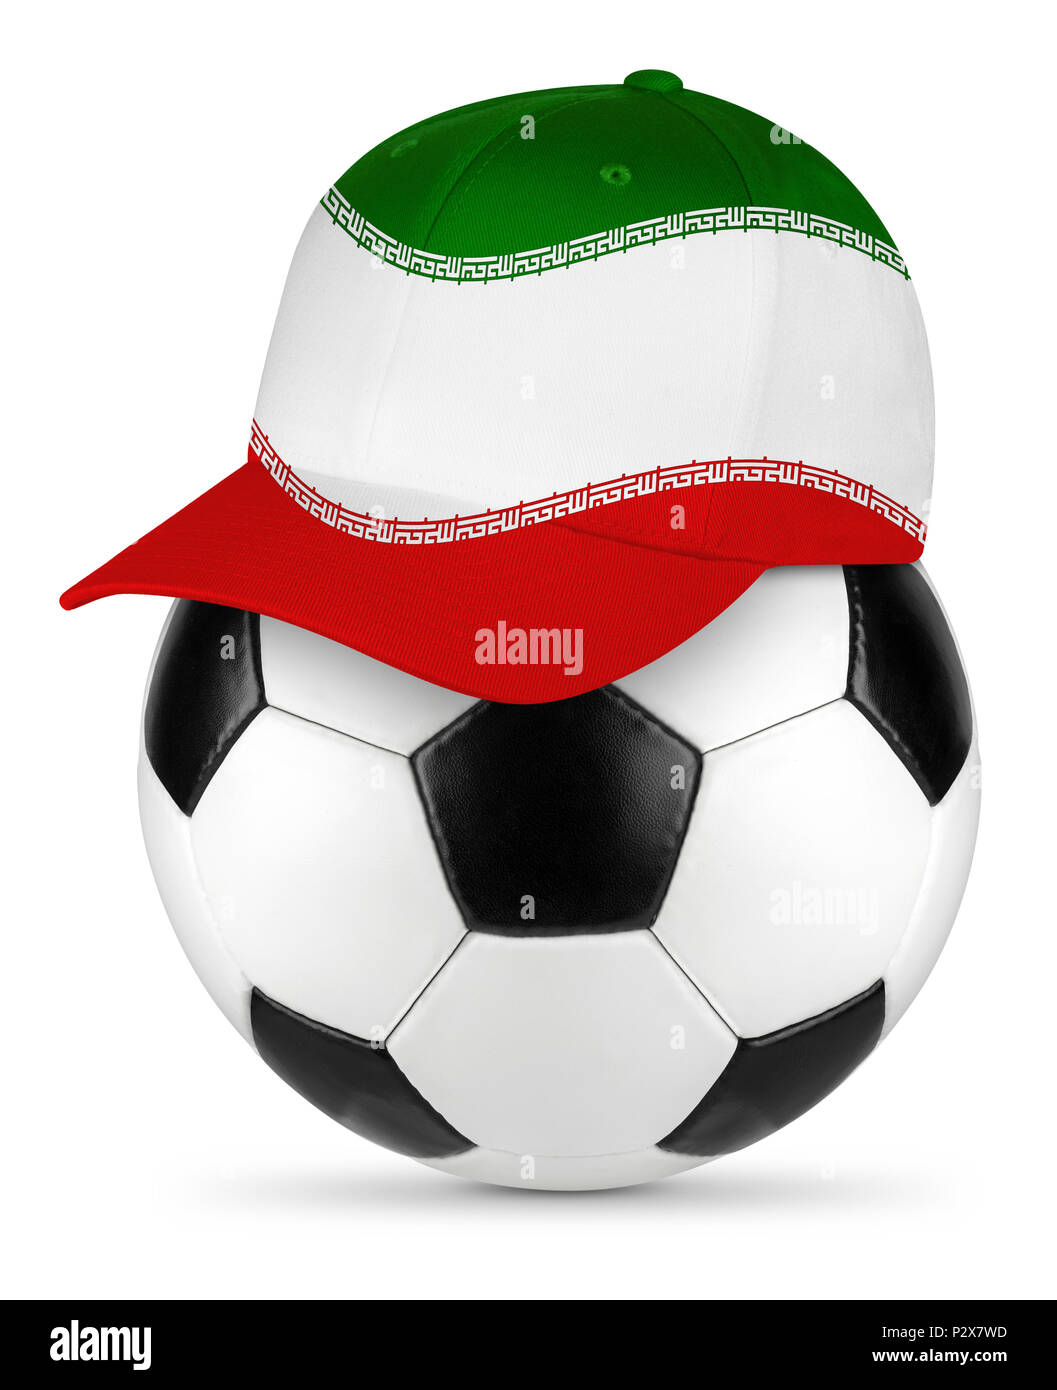 Classic black white leather soccer ball with iran Iranian baseball fans cap isolated background sport football concept Stock Photo